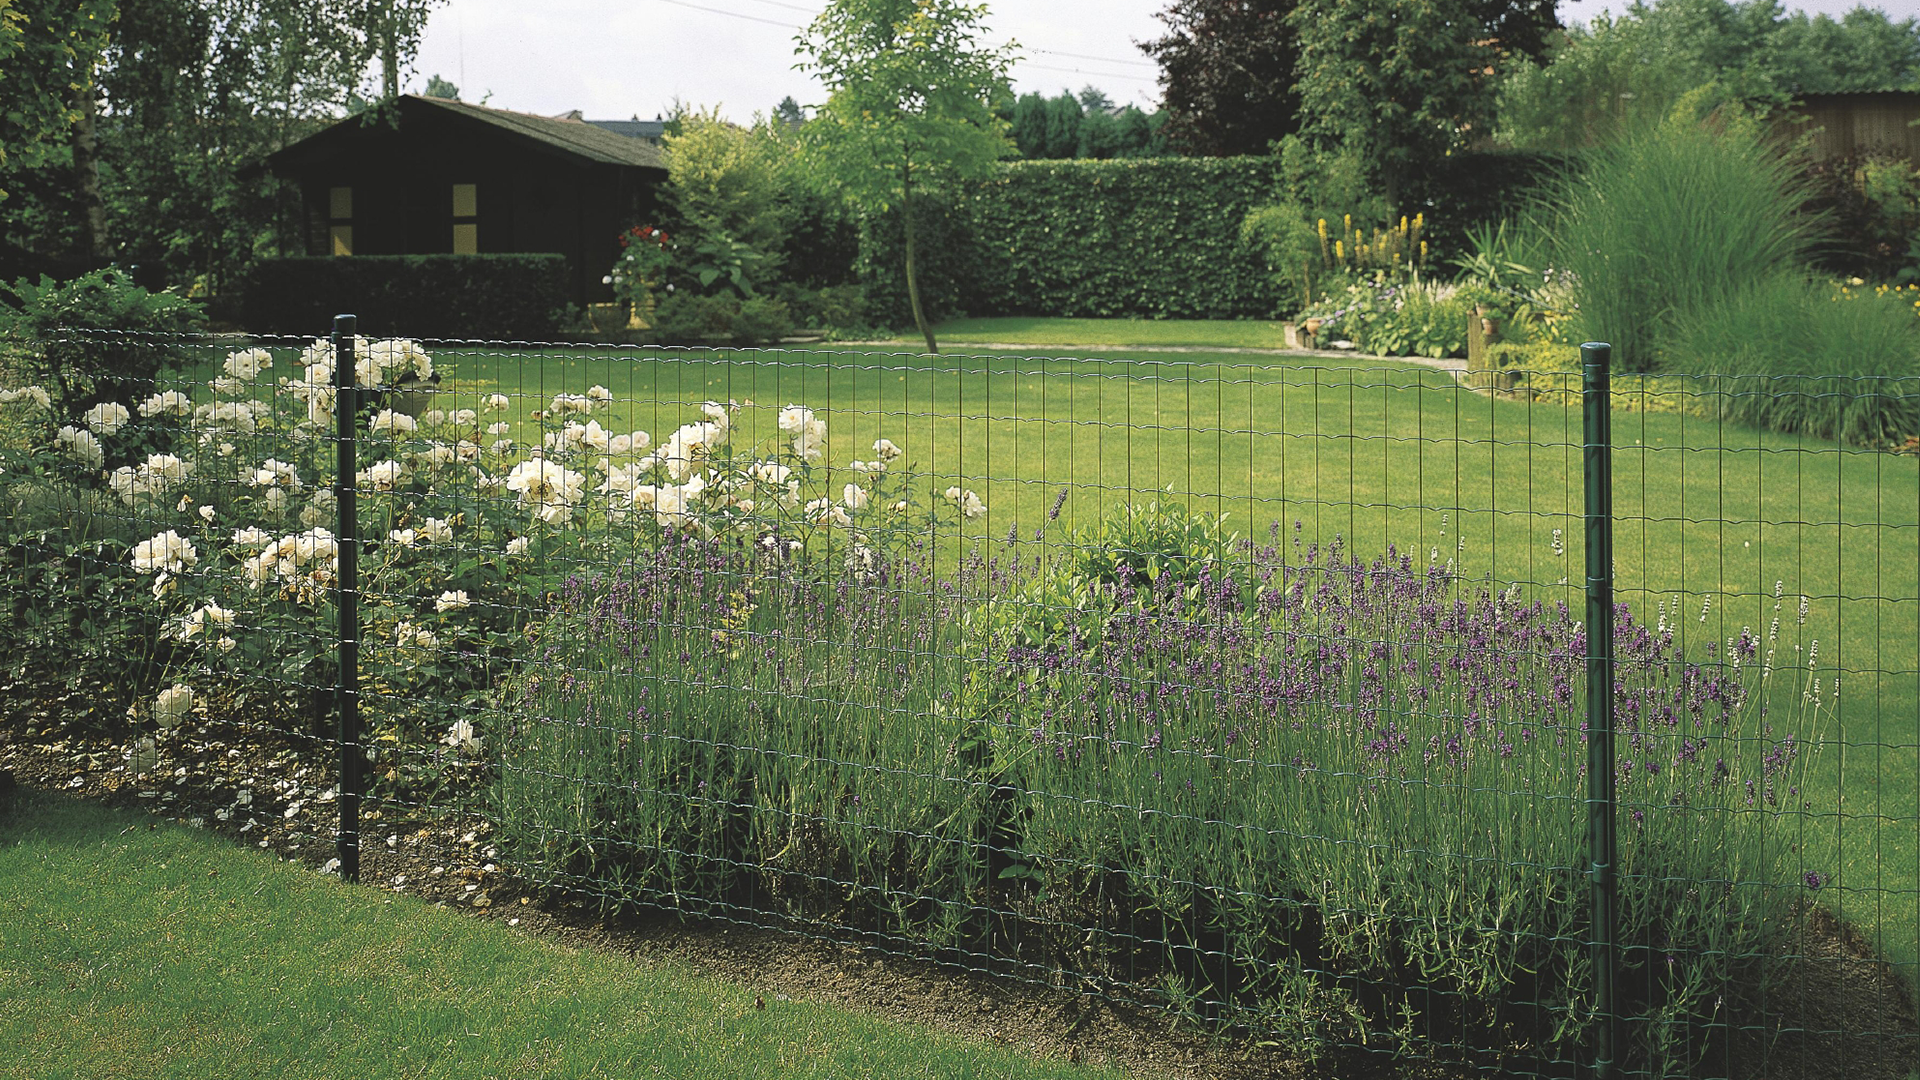 Partitioning Fences: Dividing Large Outdoor Spaces